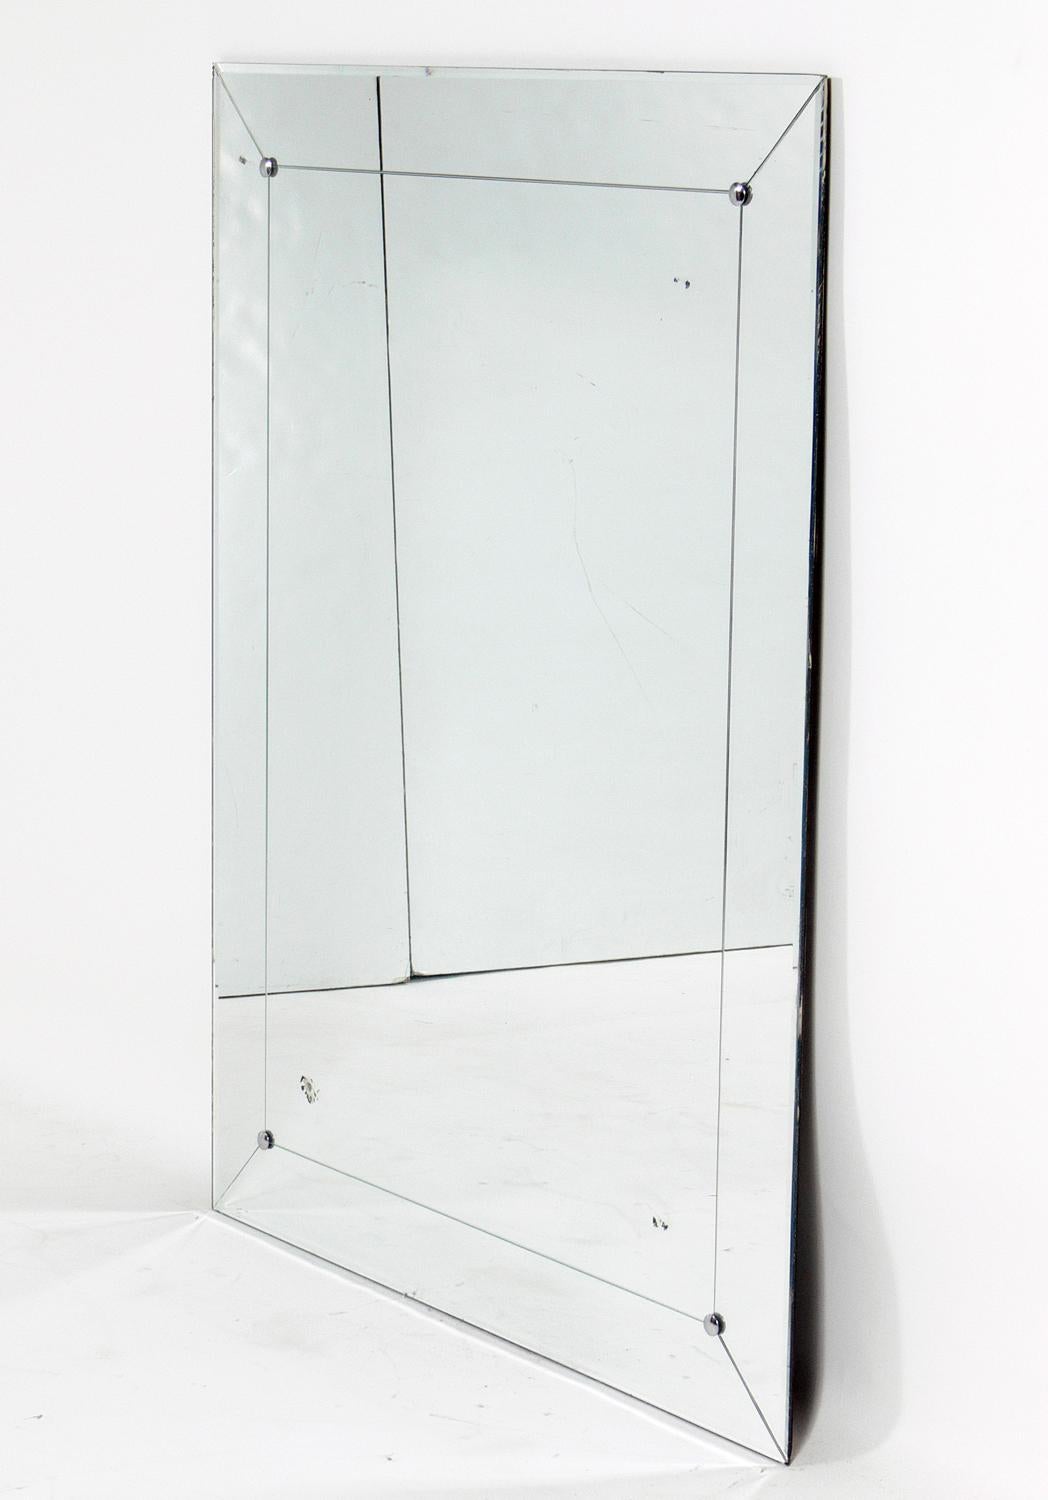 Clean lined Art Deco mirror, American, circa 1940s. Retains wonderful original patina with some age appropriate age spotting.